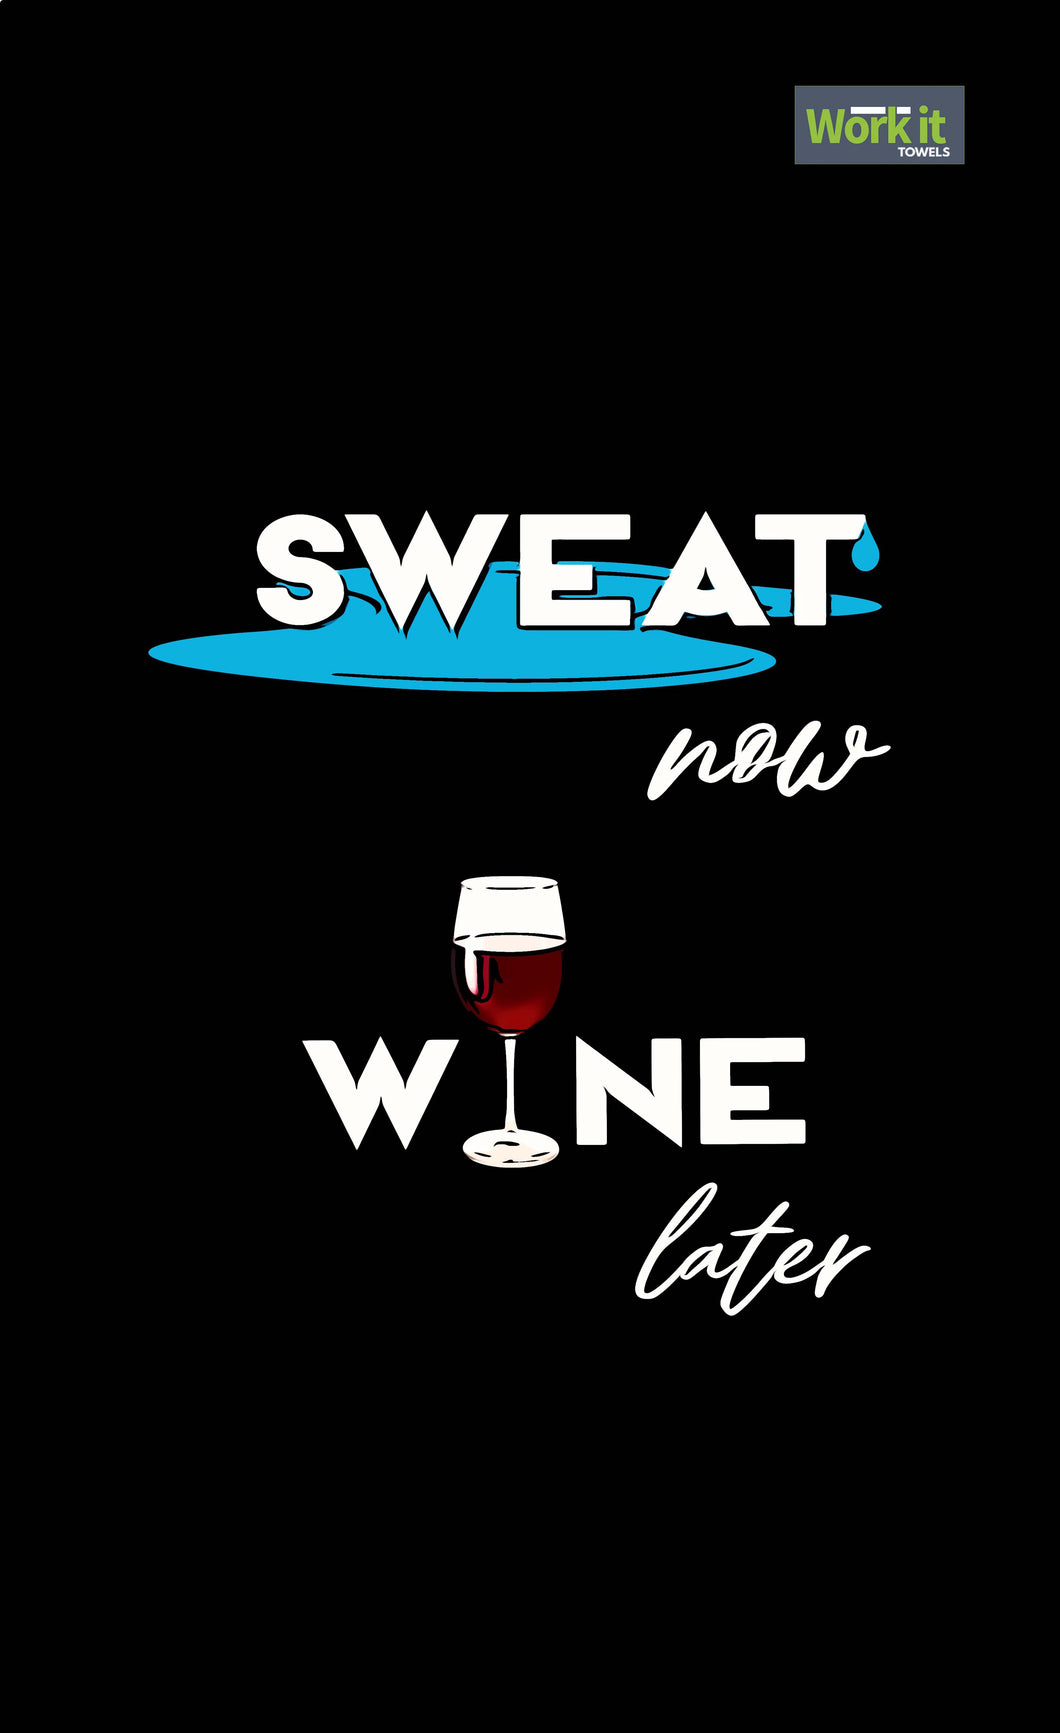 Sweat Now, Wine Later